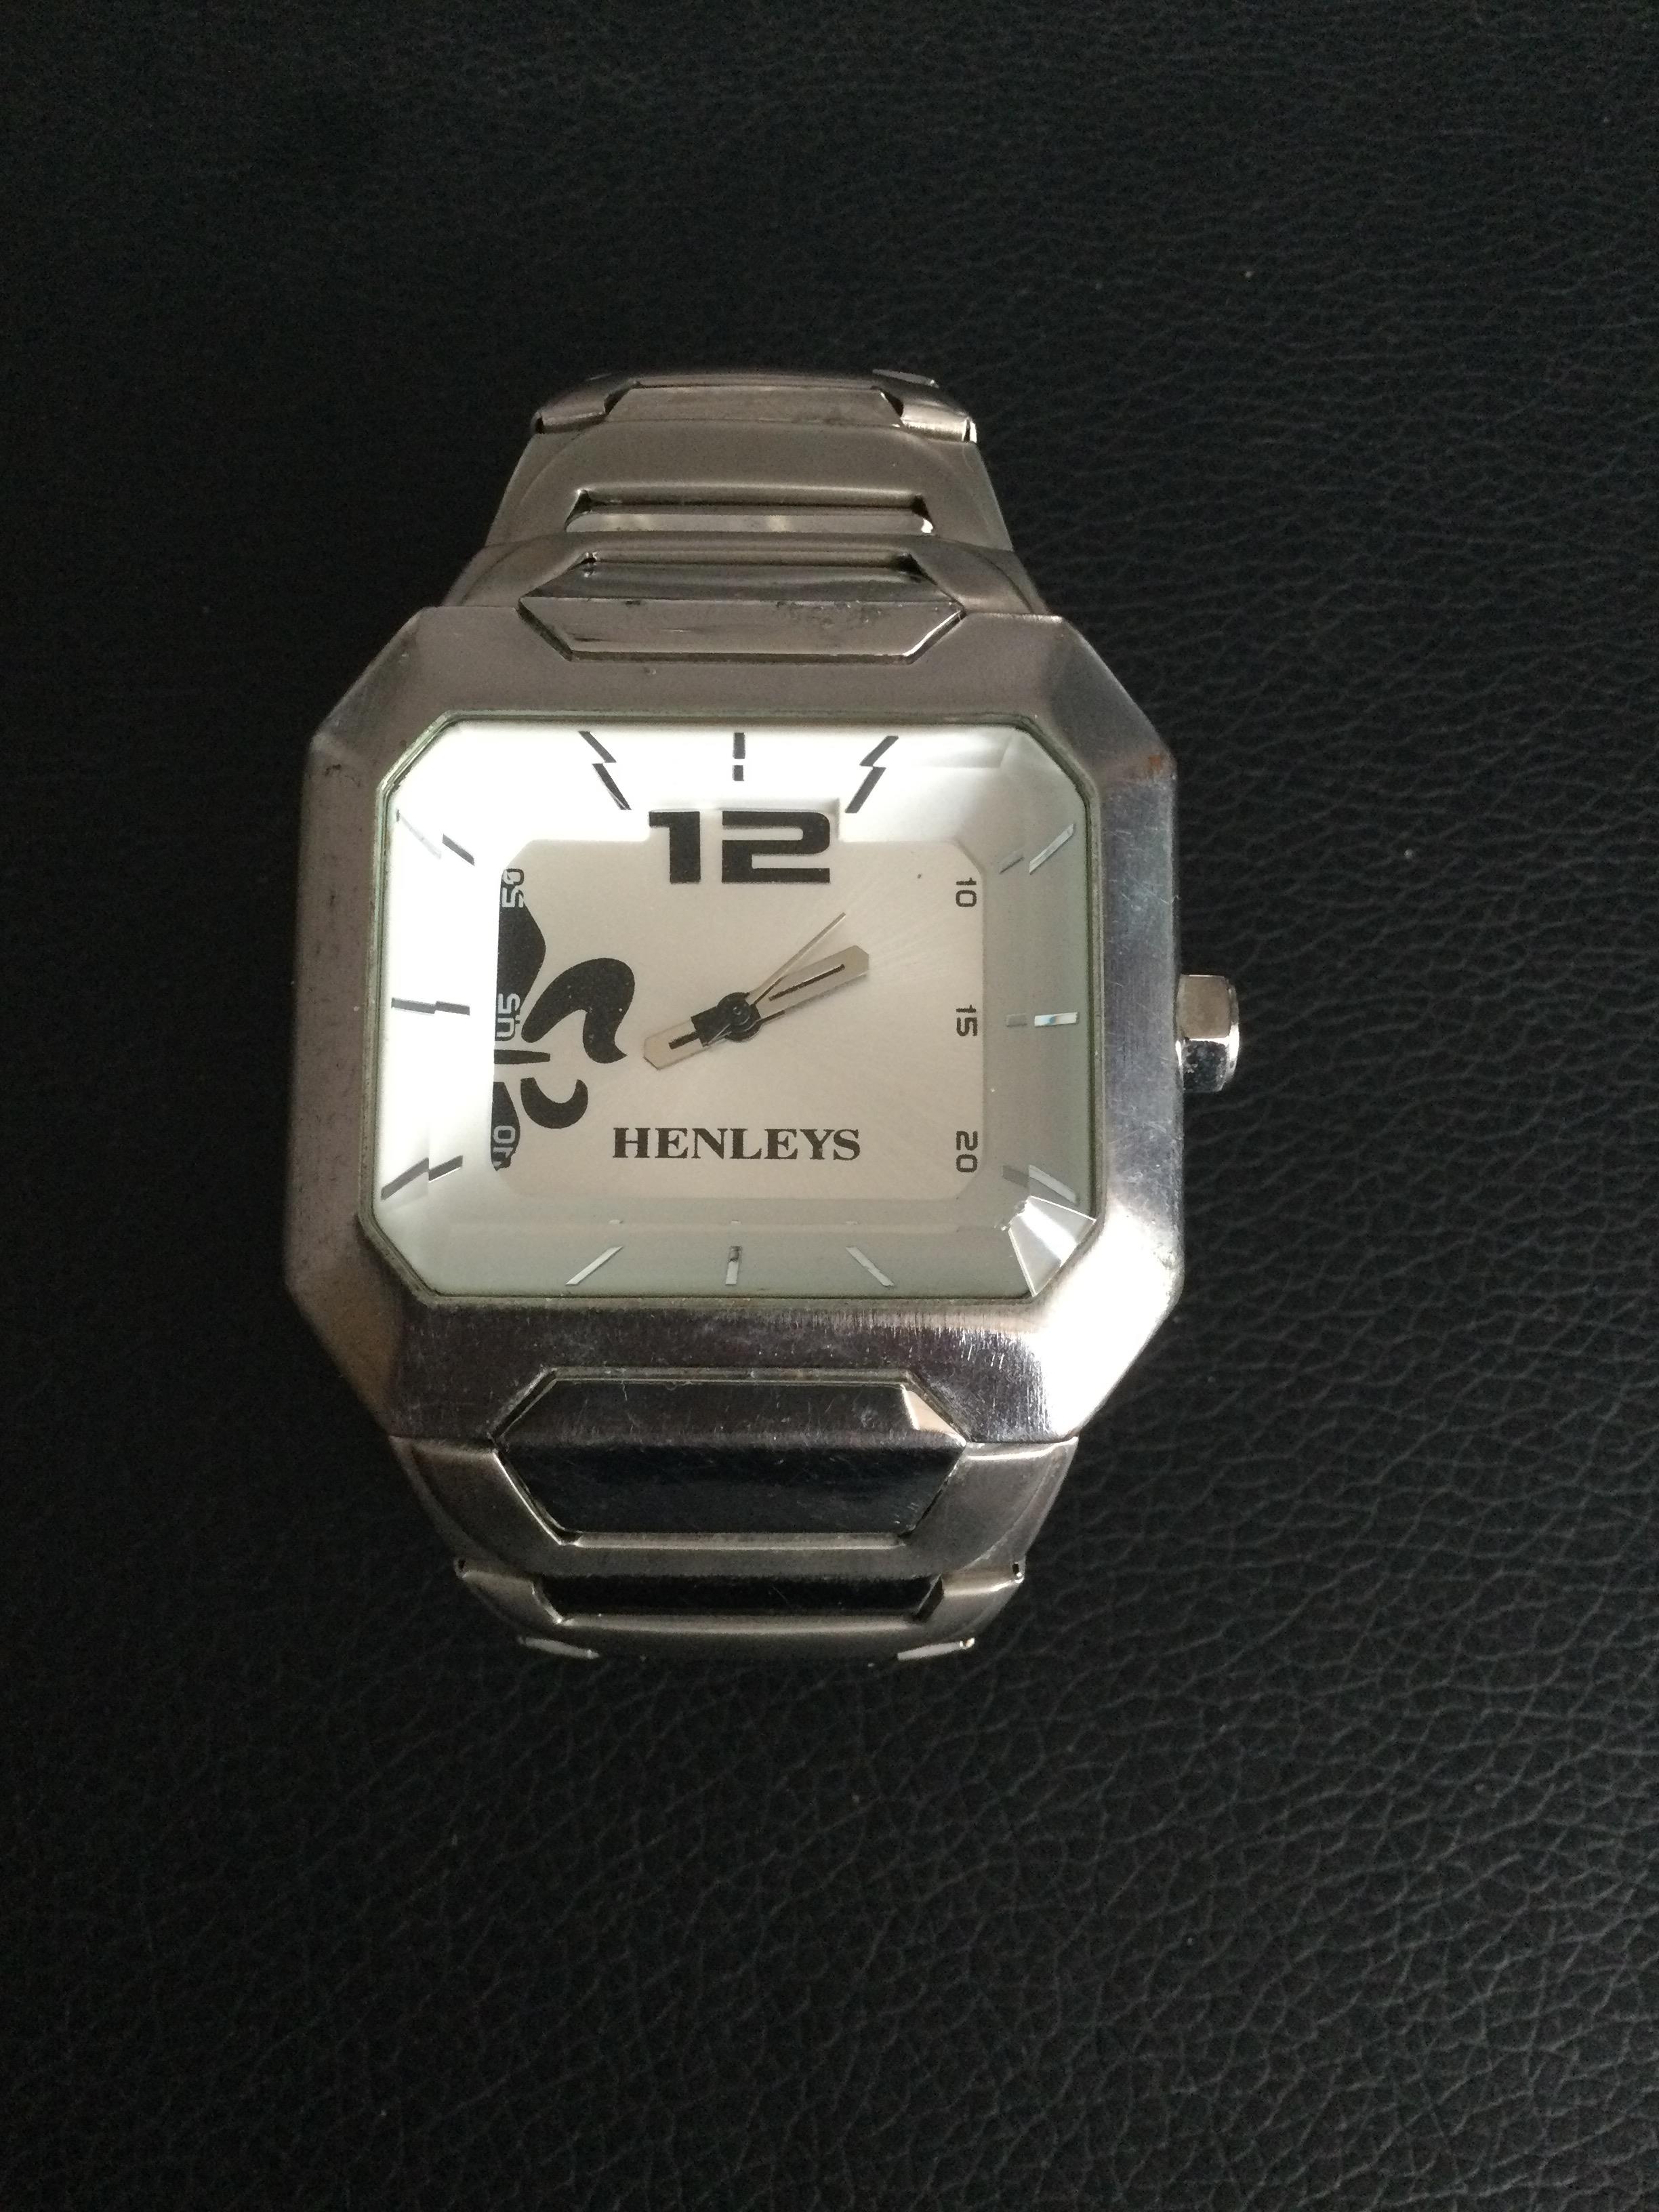 Henley Gents Wristwatch (GS42) A large Gents Henley's Wristwatch in Excellent Condition. The - Image 4 of 5